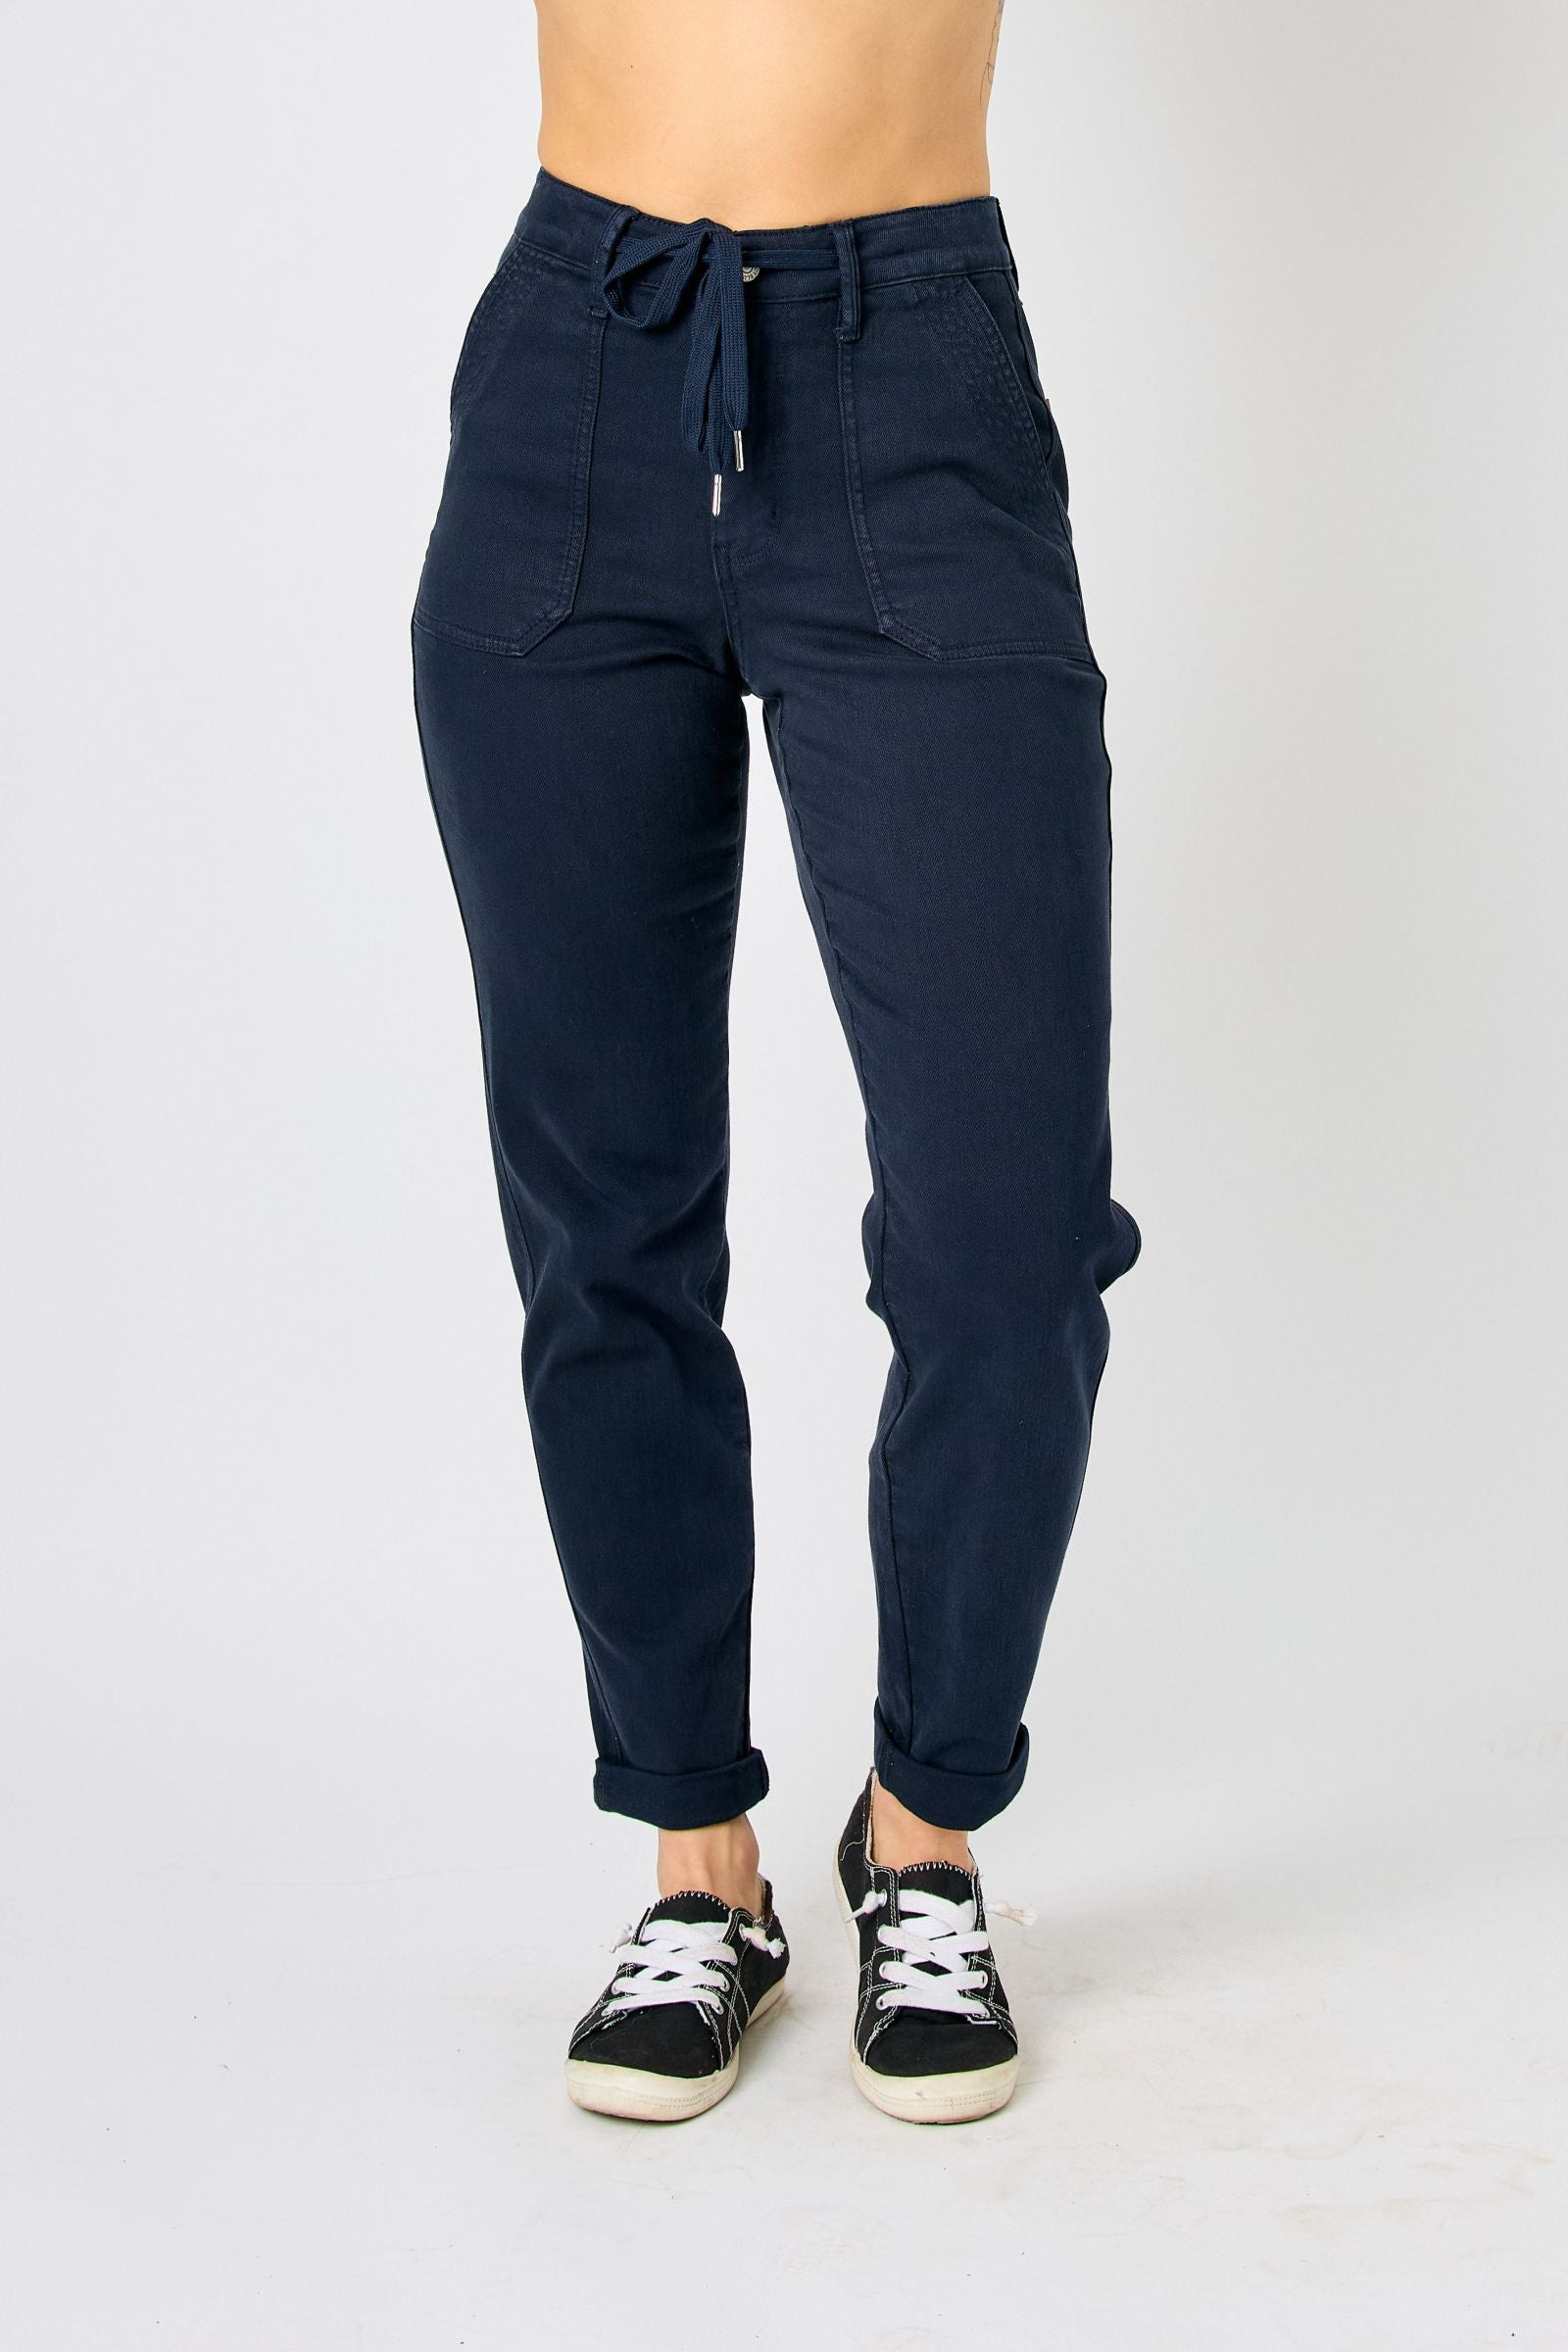 JUDY BLUE In the Navy Now Navy Denim Joggers